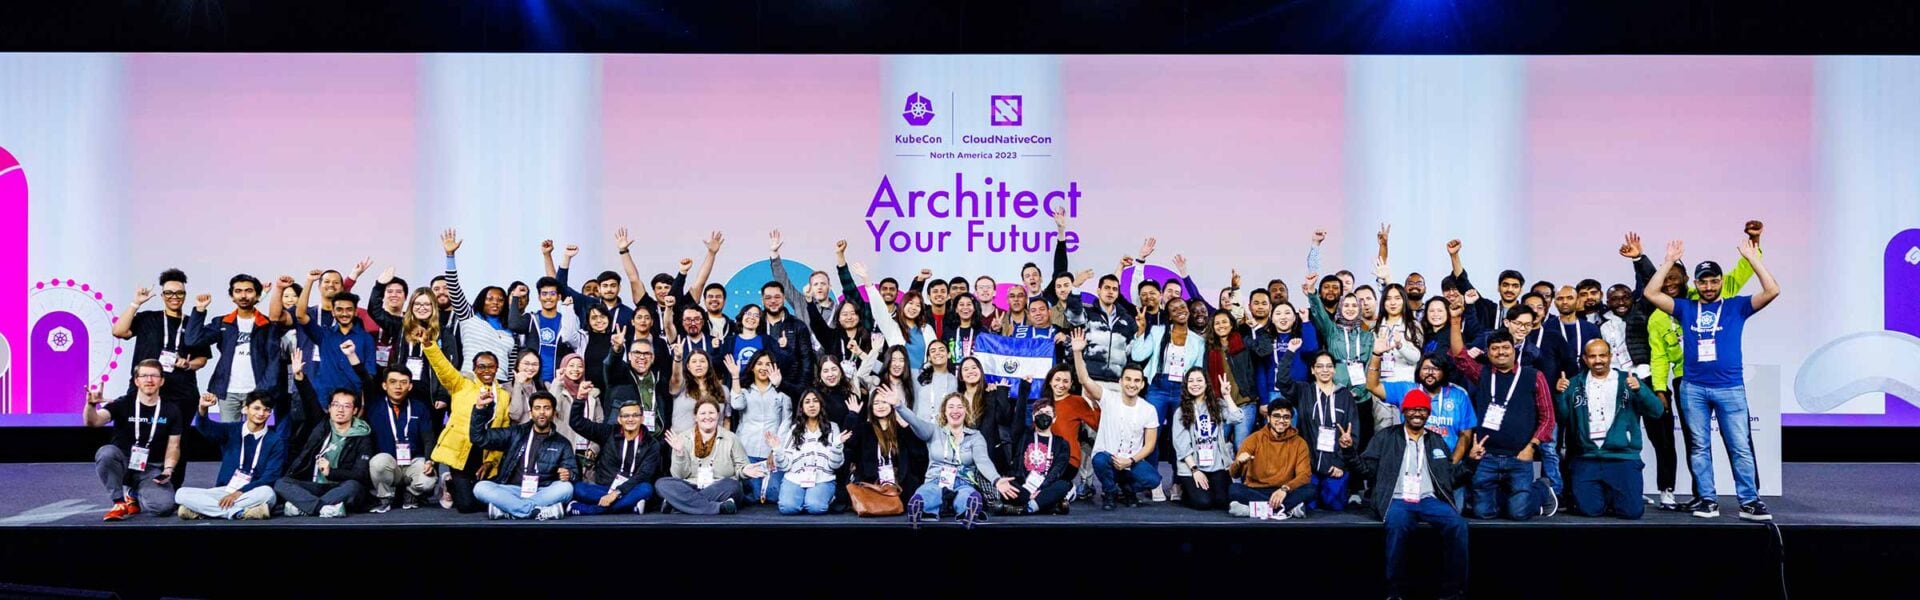 A large number of attendees, some with their arms raised, taking a group photo in front of a backdrop that says "Architect Your Future."